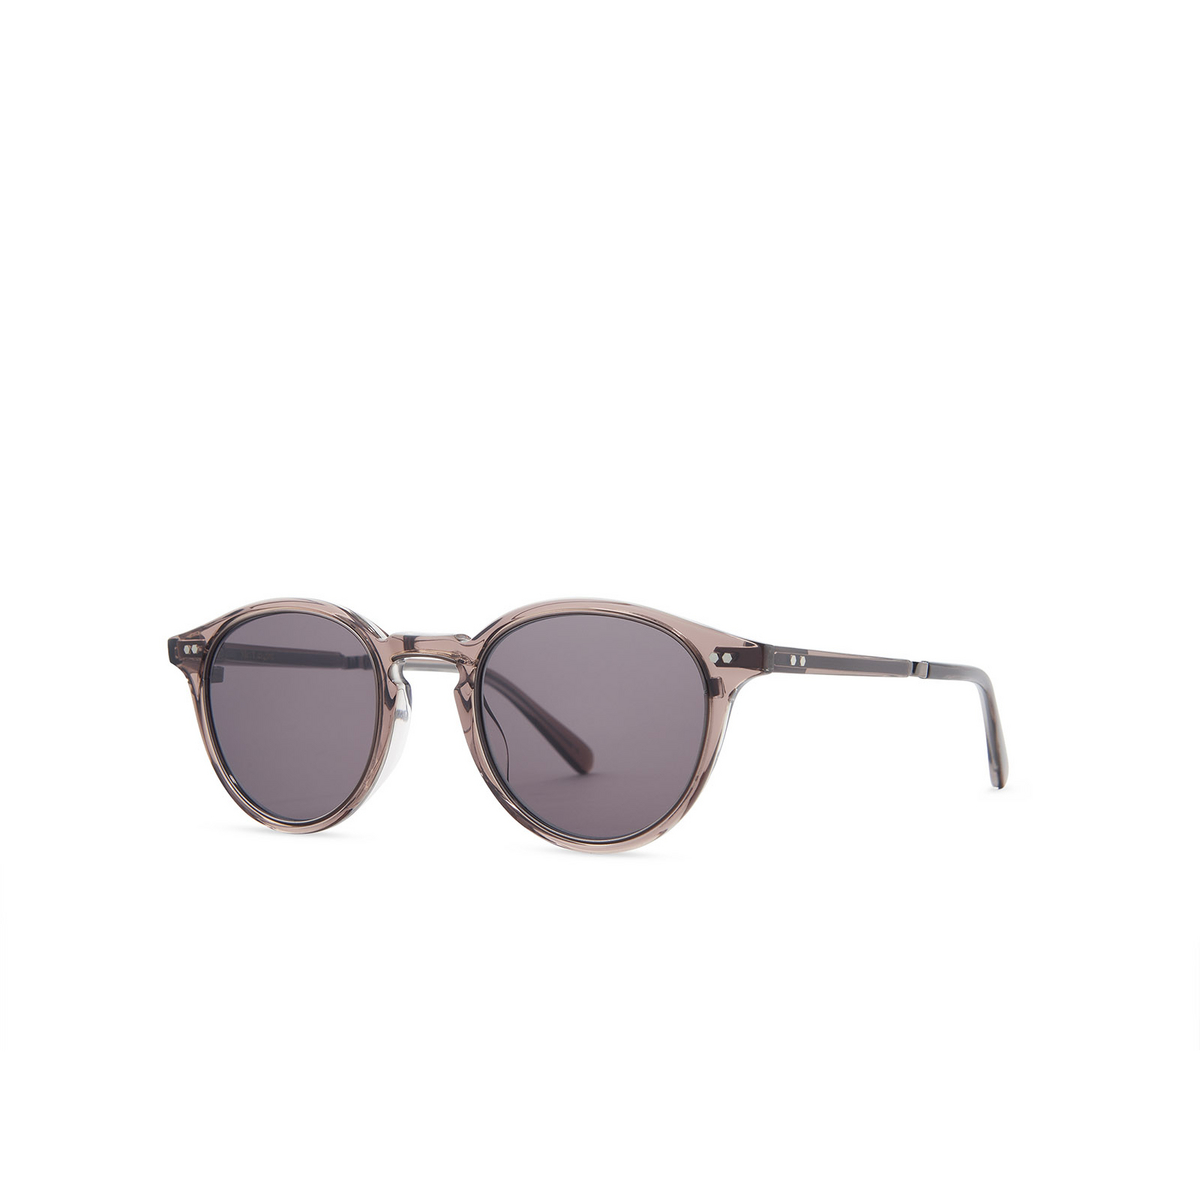 Mr. Leight MARMONT II S Sunglasses RCL-CO/NOI Rose Clay-Copper - three-quarters view